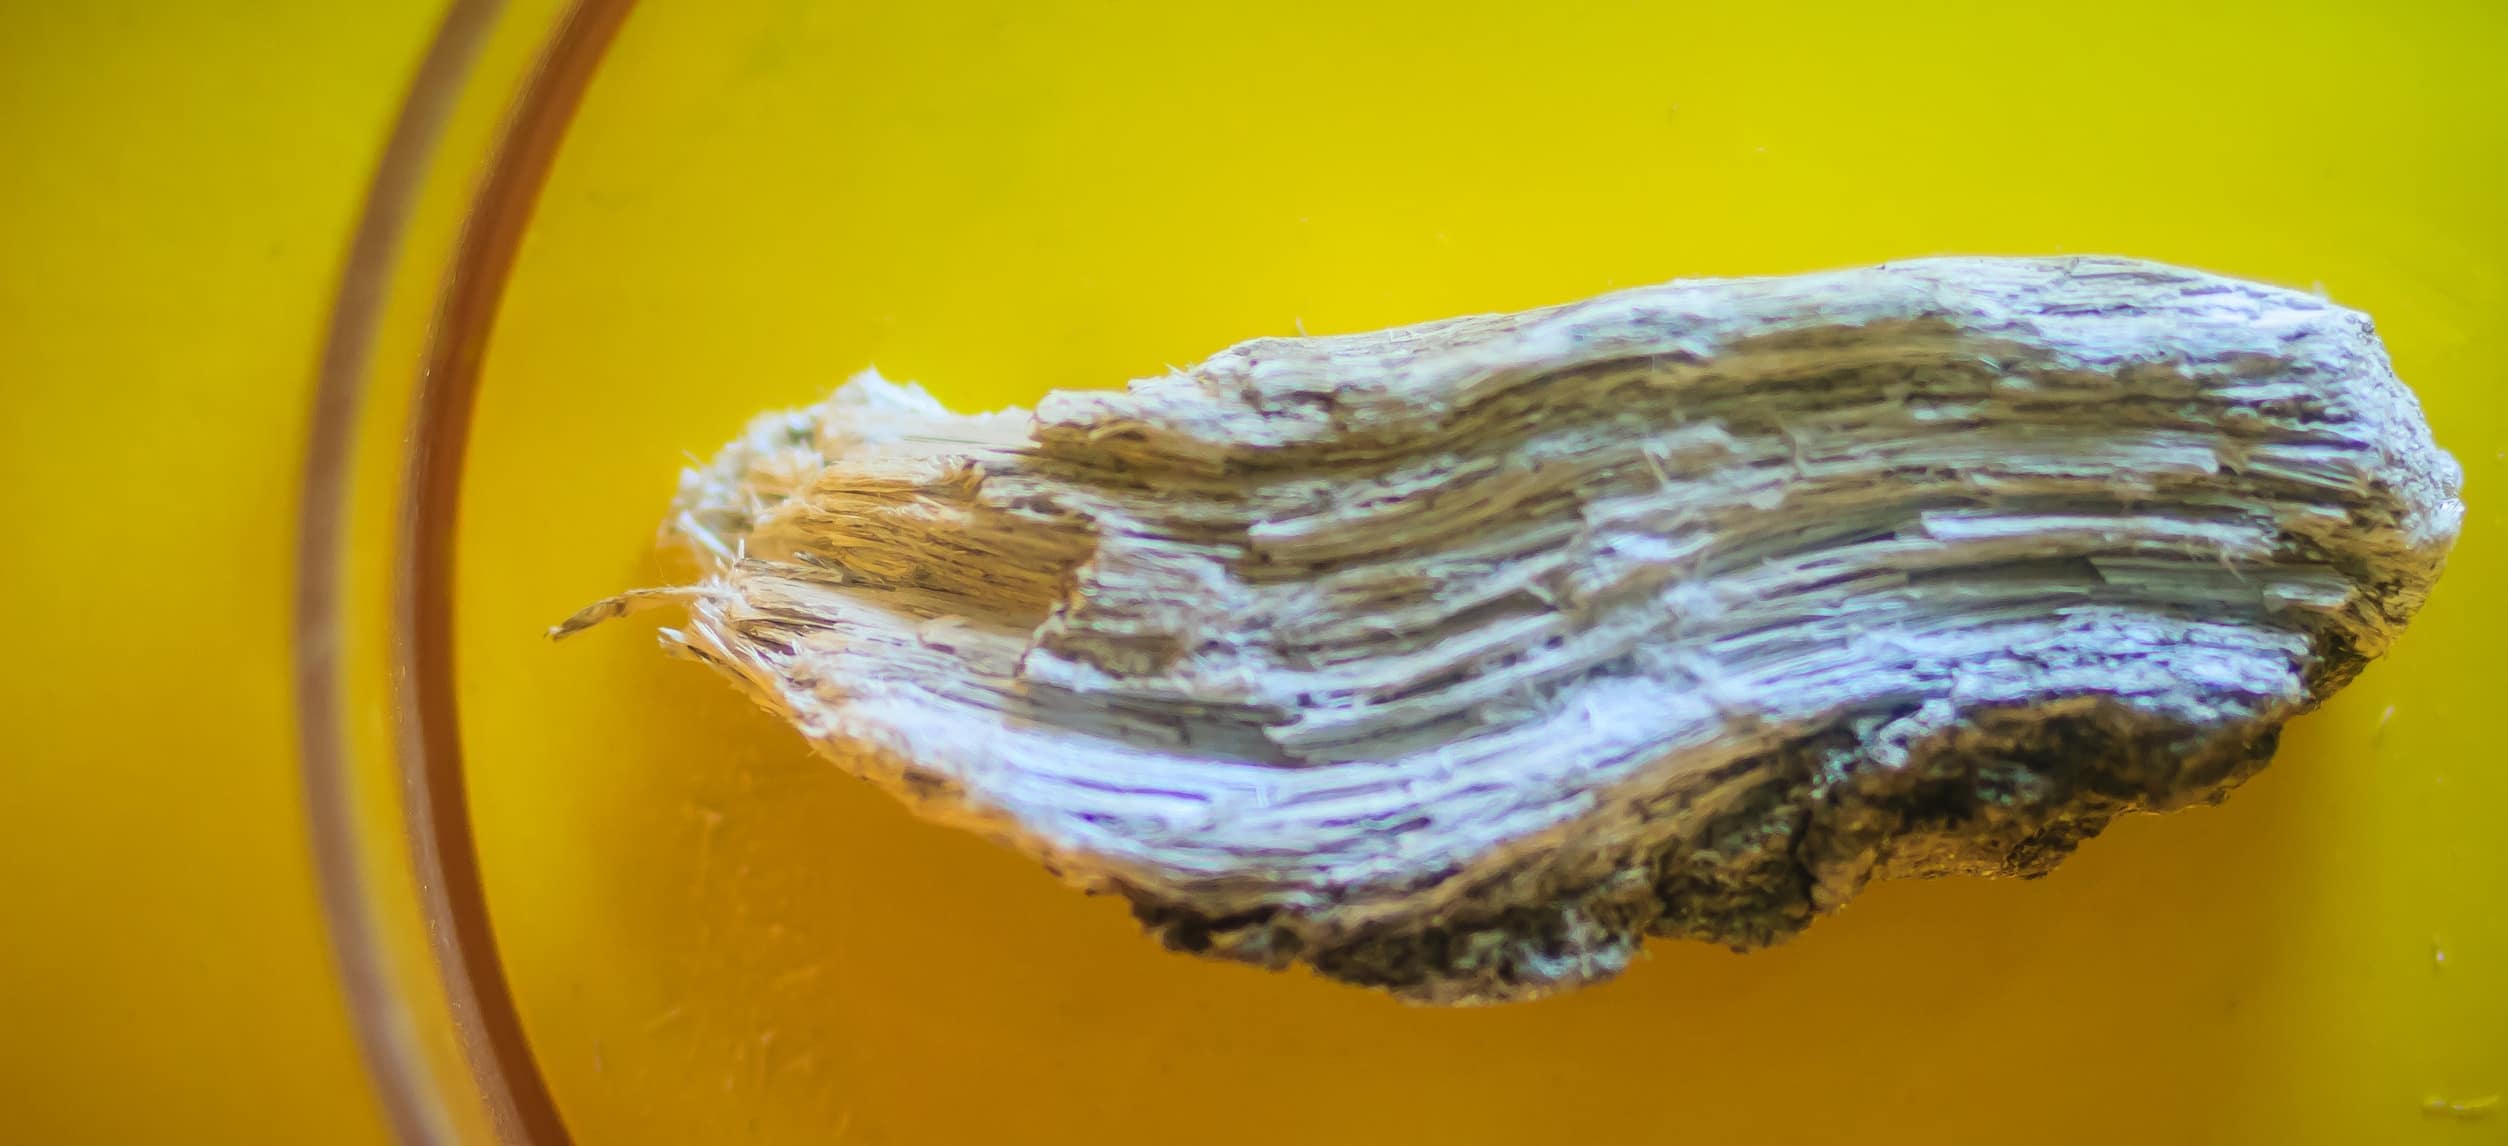 Amphibole silicate mineral that commonly found in metamorphic rocks